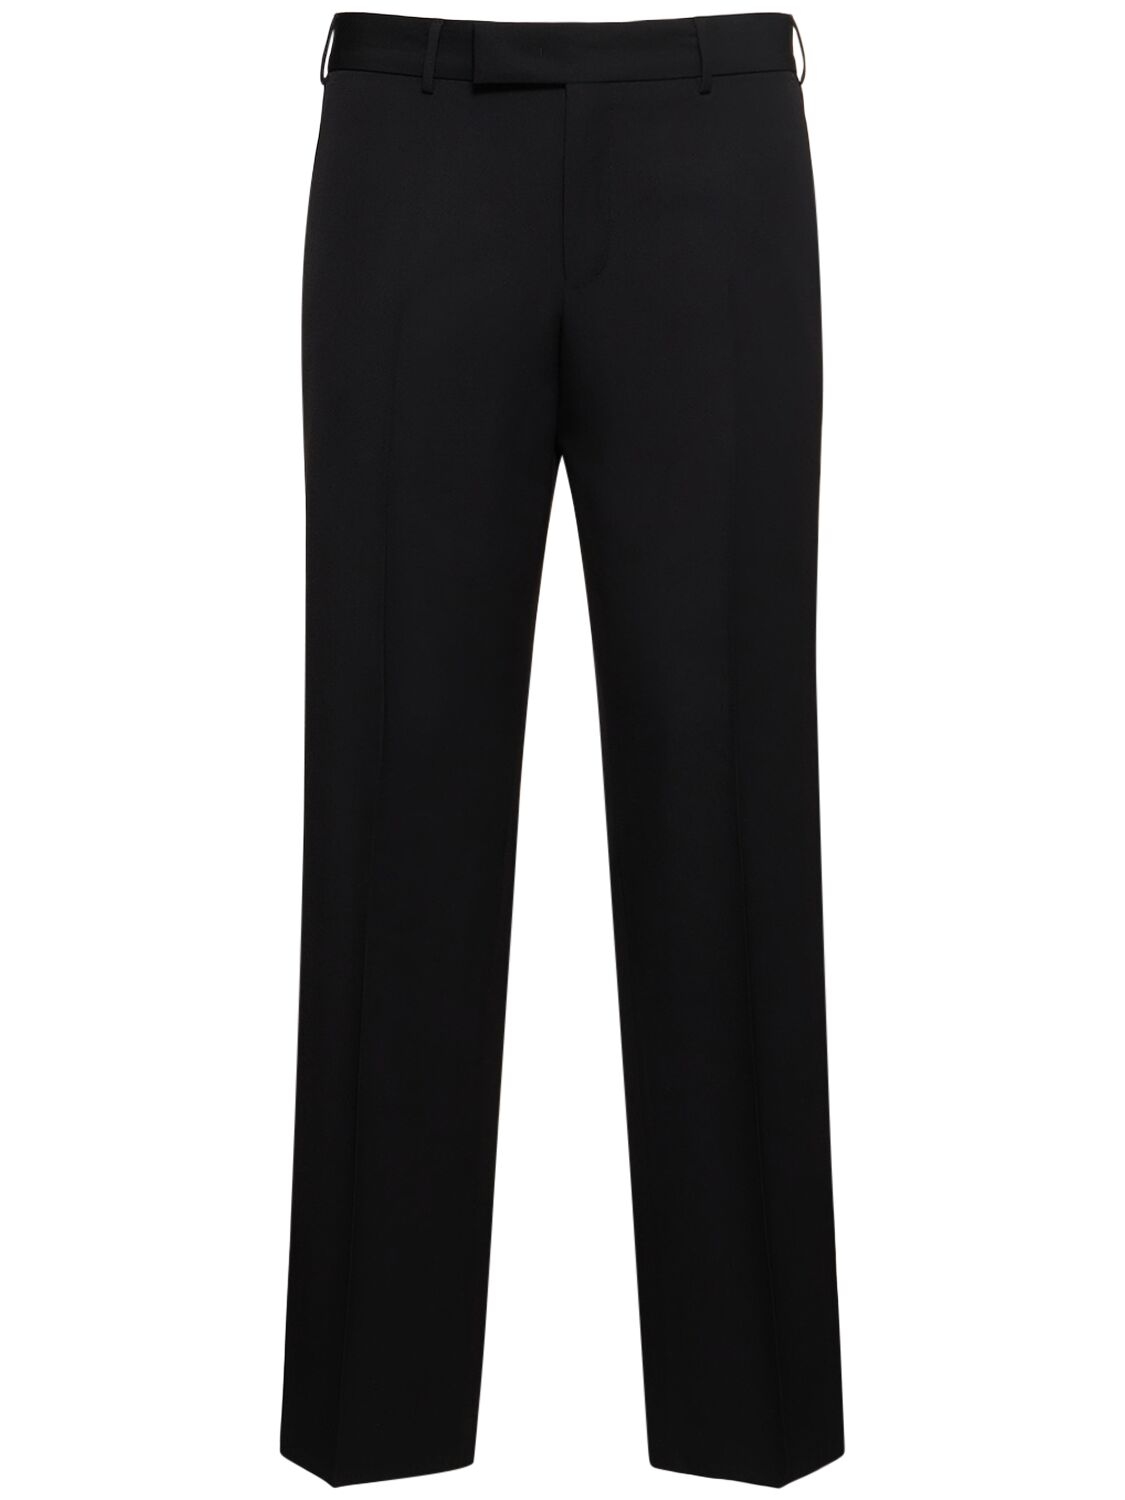 Pt Torino Freedom Flat Front Wool Trousers In Black